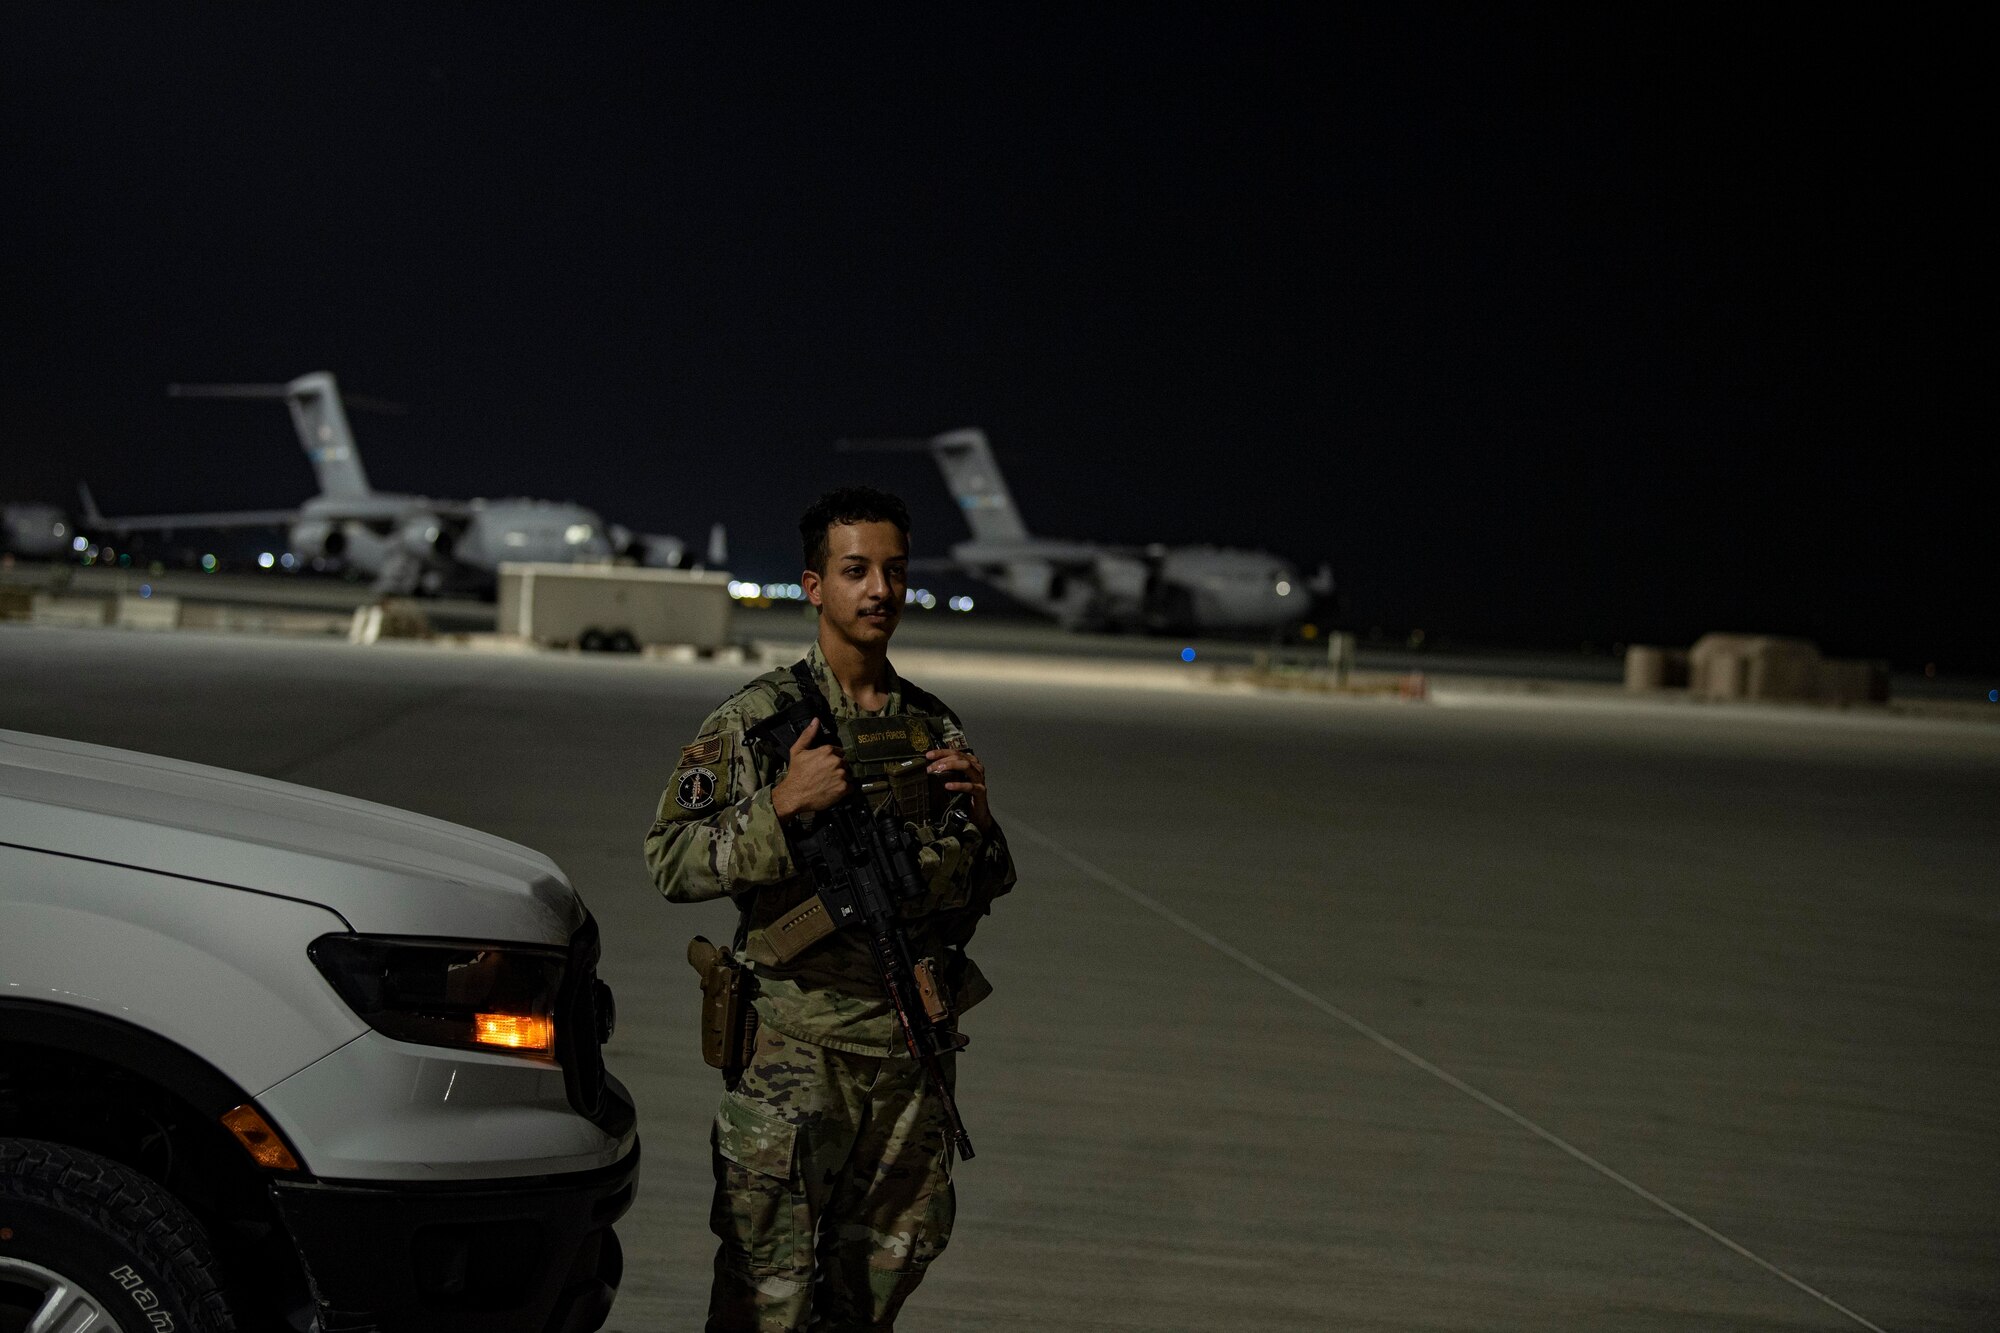 U.S. Air Force Senior Airman David Molina, 379th Expeditionary Security Forces Squadron, stands watch on the flight line July 25, 2022 at Al Udeid Airbase, Qatar. Security Forces maintains security over key assets and infrastructure. (U.S. Air National Guard photo by Master. Sgt. Michael J. Kelly)